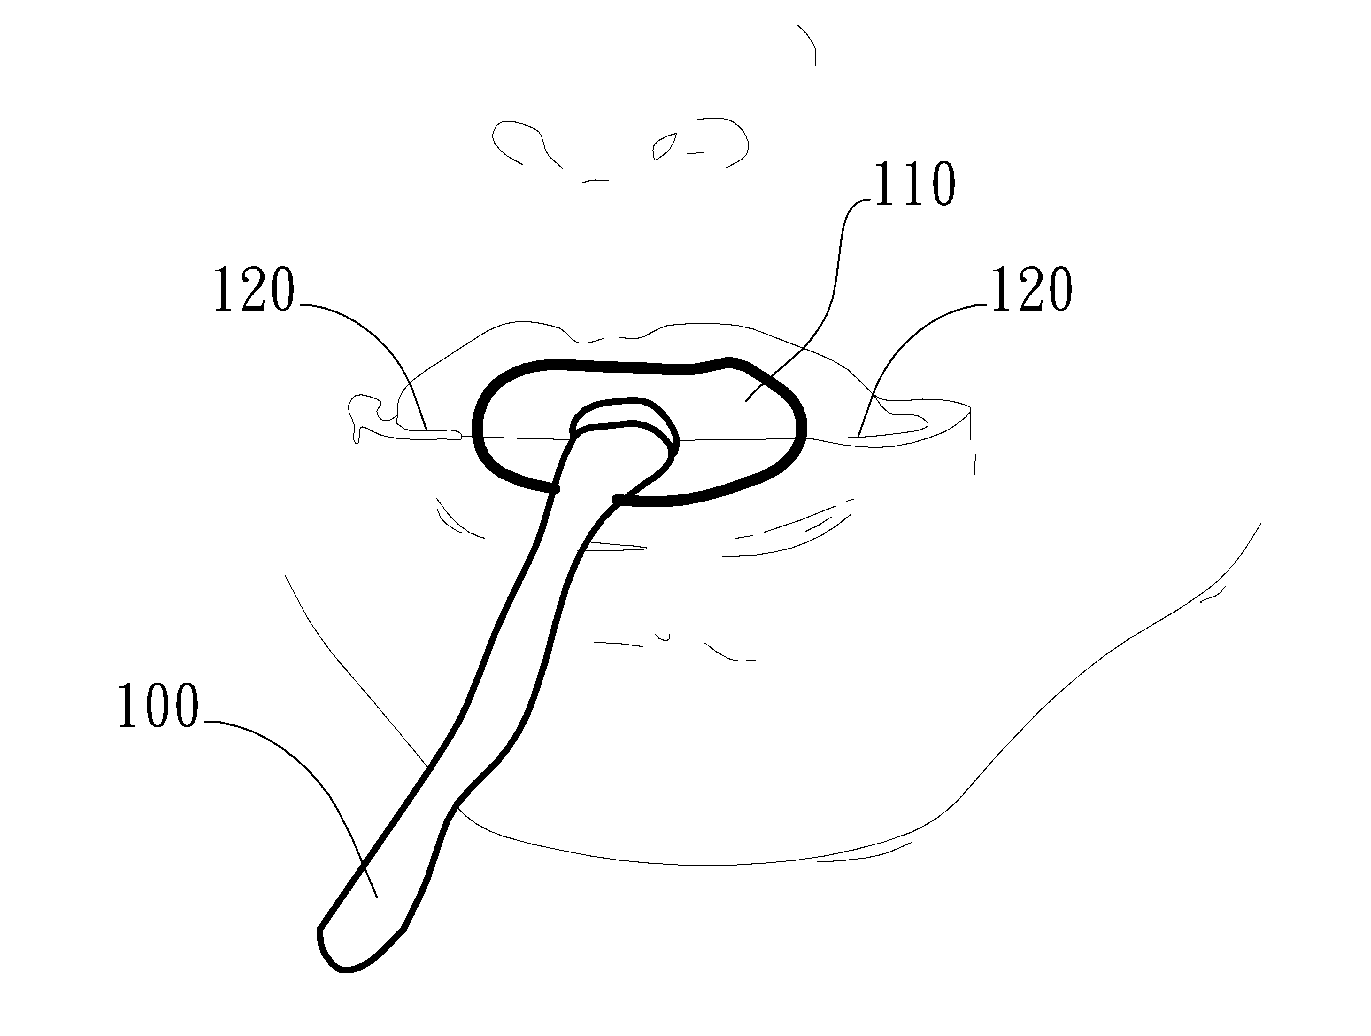 Adjustable oral interface and method to maintain upper airway patency